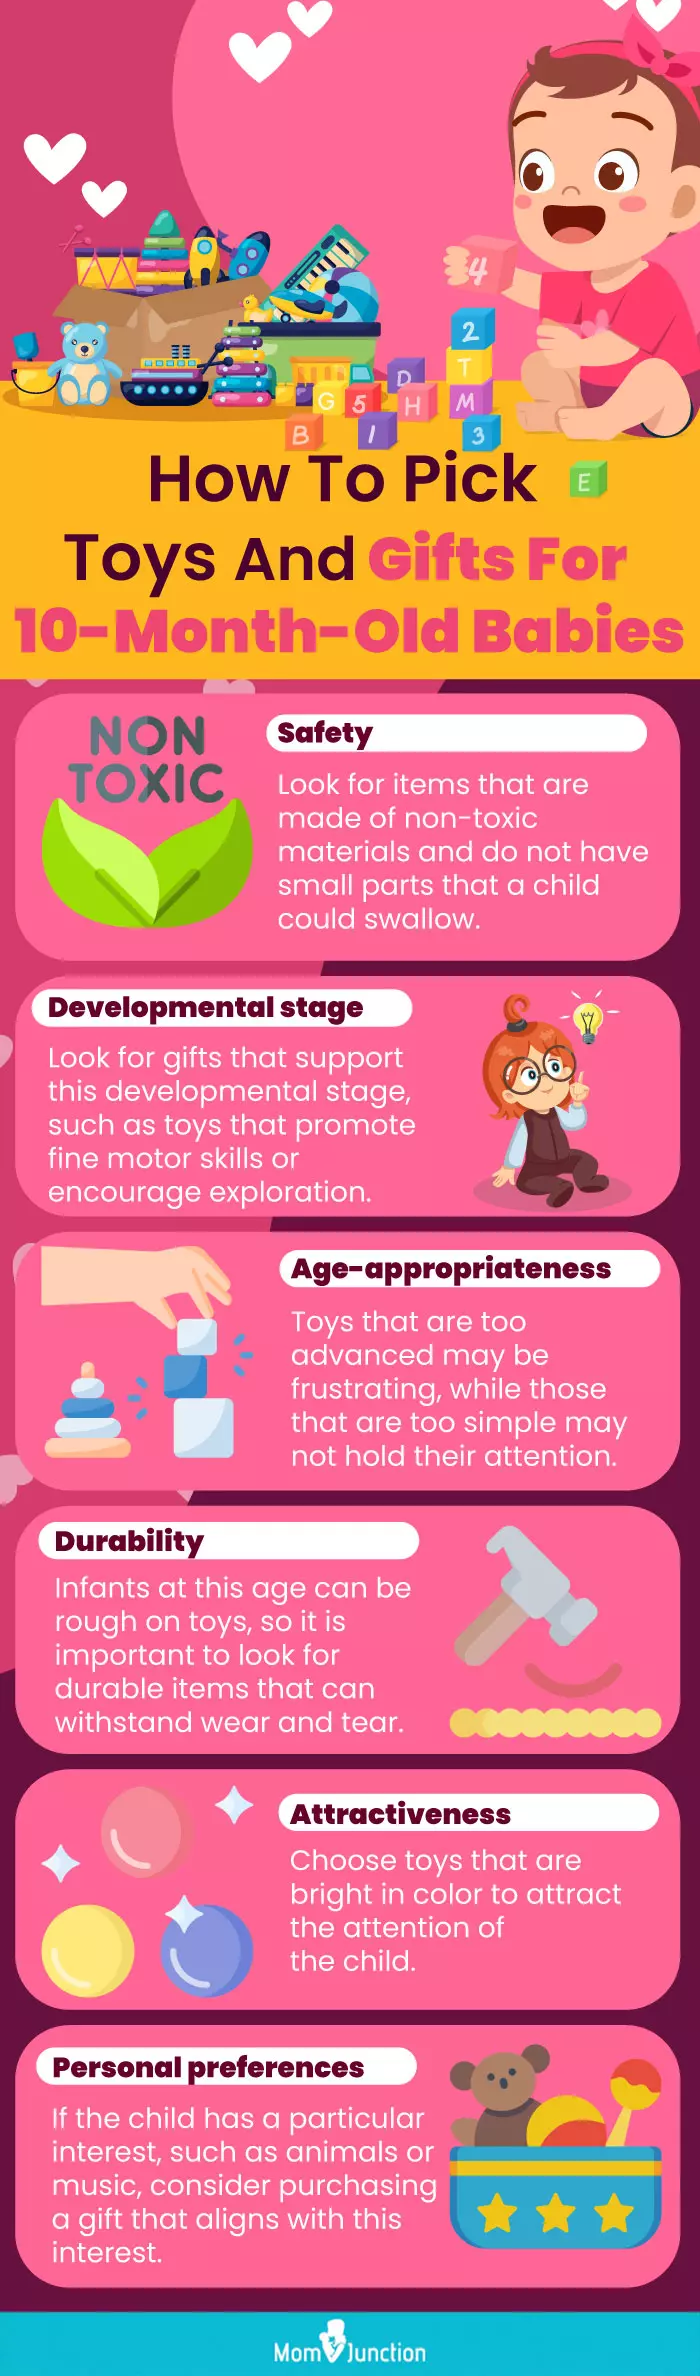 How-To-Pick-Toys-And-Gifts-For-10-Month-Old-Babies (infographic)